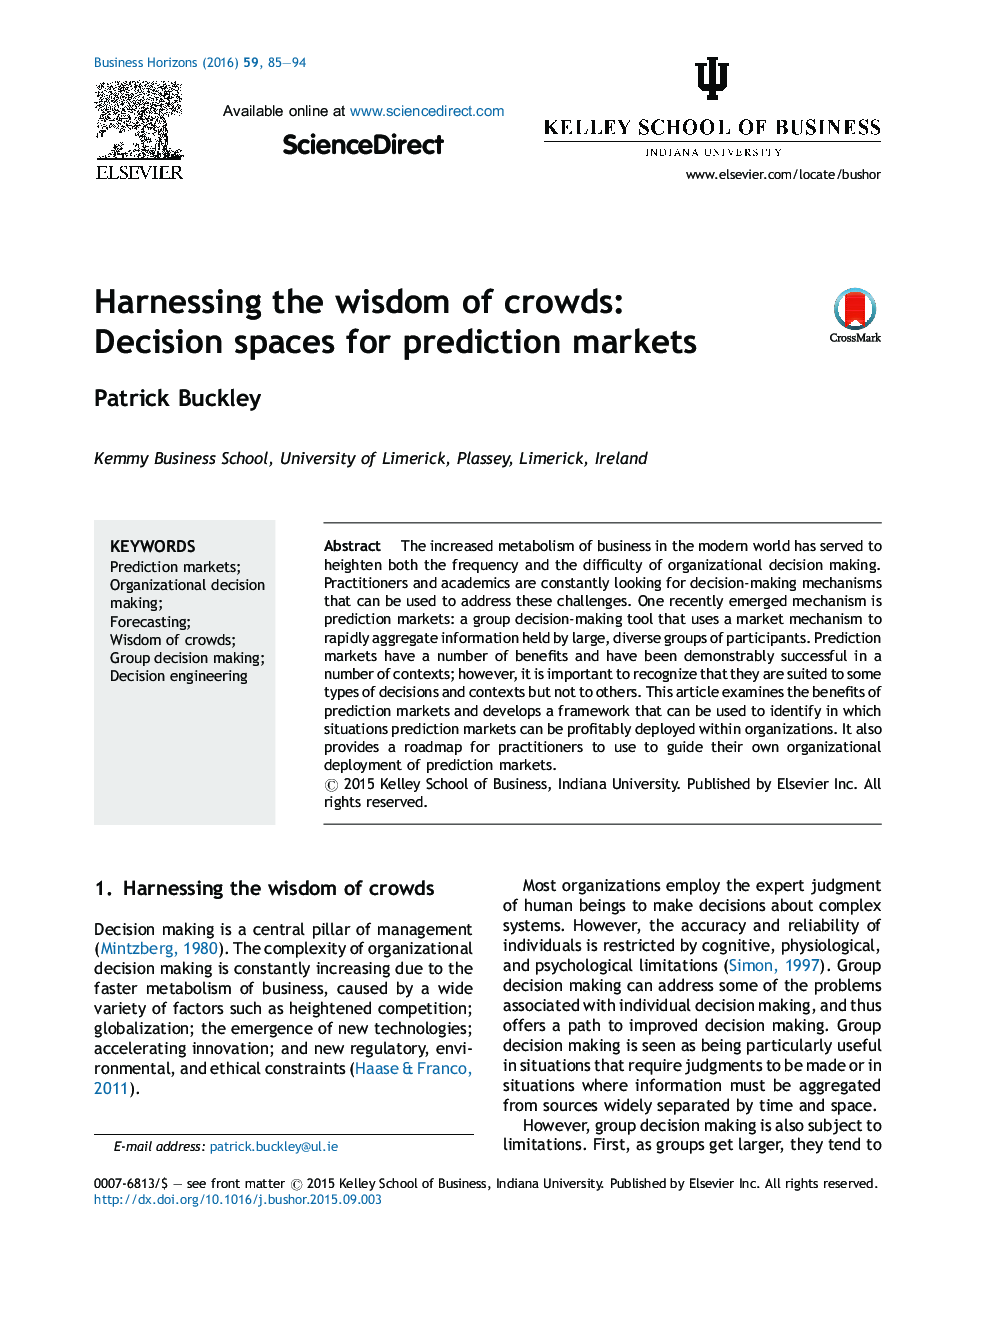 Harnessing the wisdom of crowds: Decision spaces for prediction markets